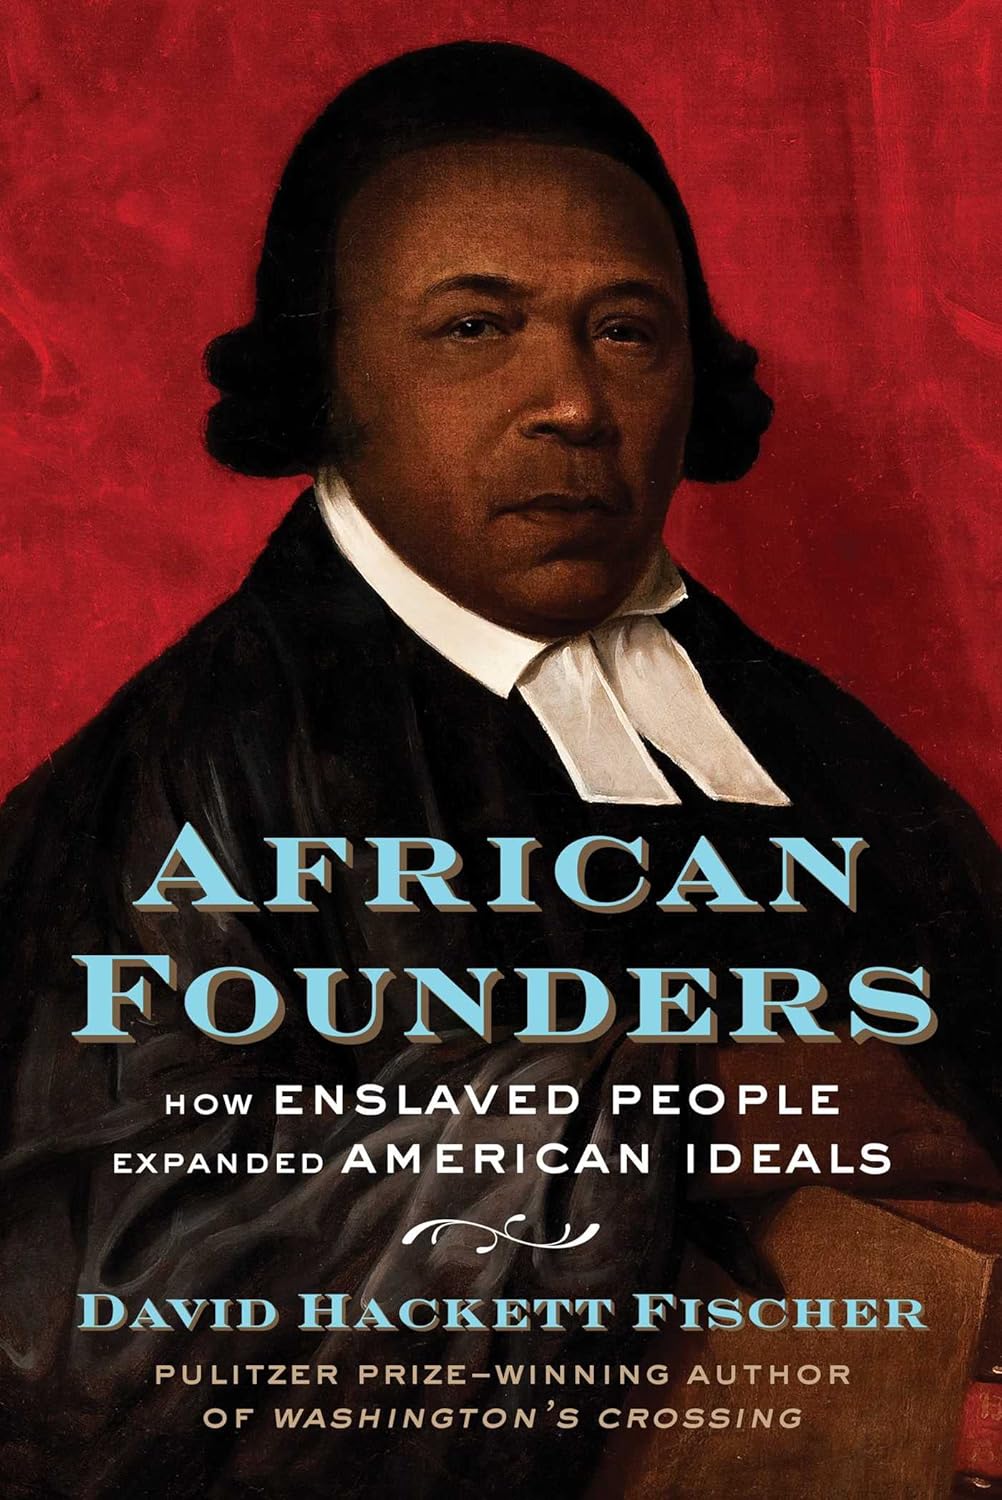 African Founders How Enslaved People Expanded American Ideals by David Hackett Fischer